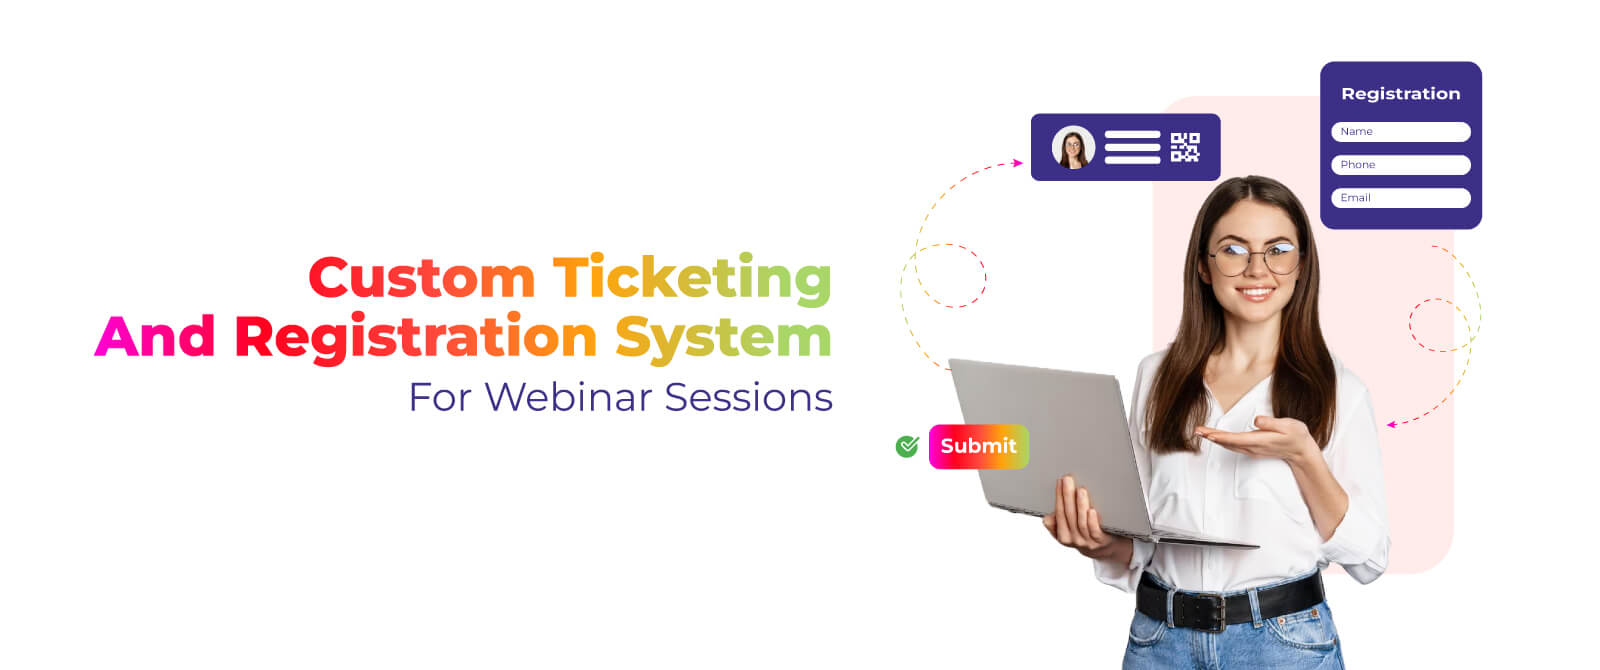 Custom Ticketing and Registration System for Webinar Sessions